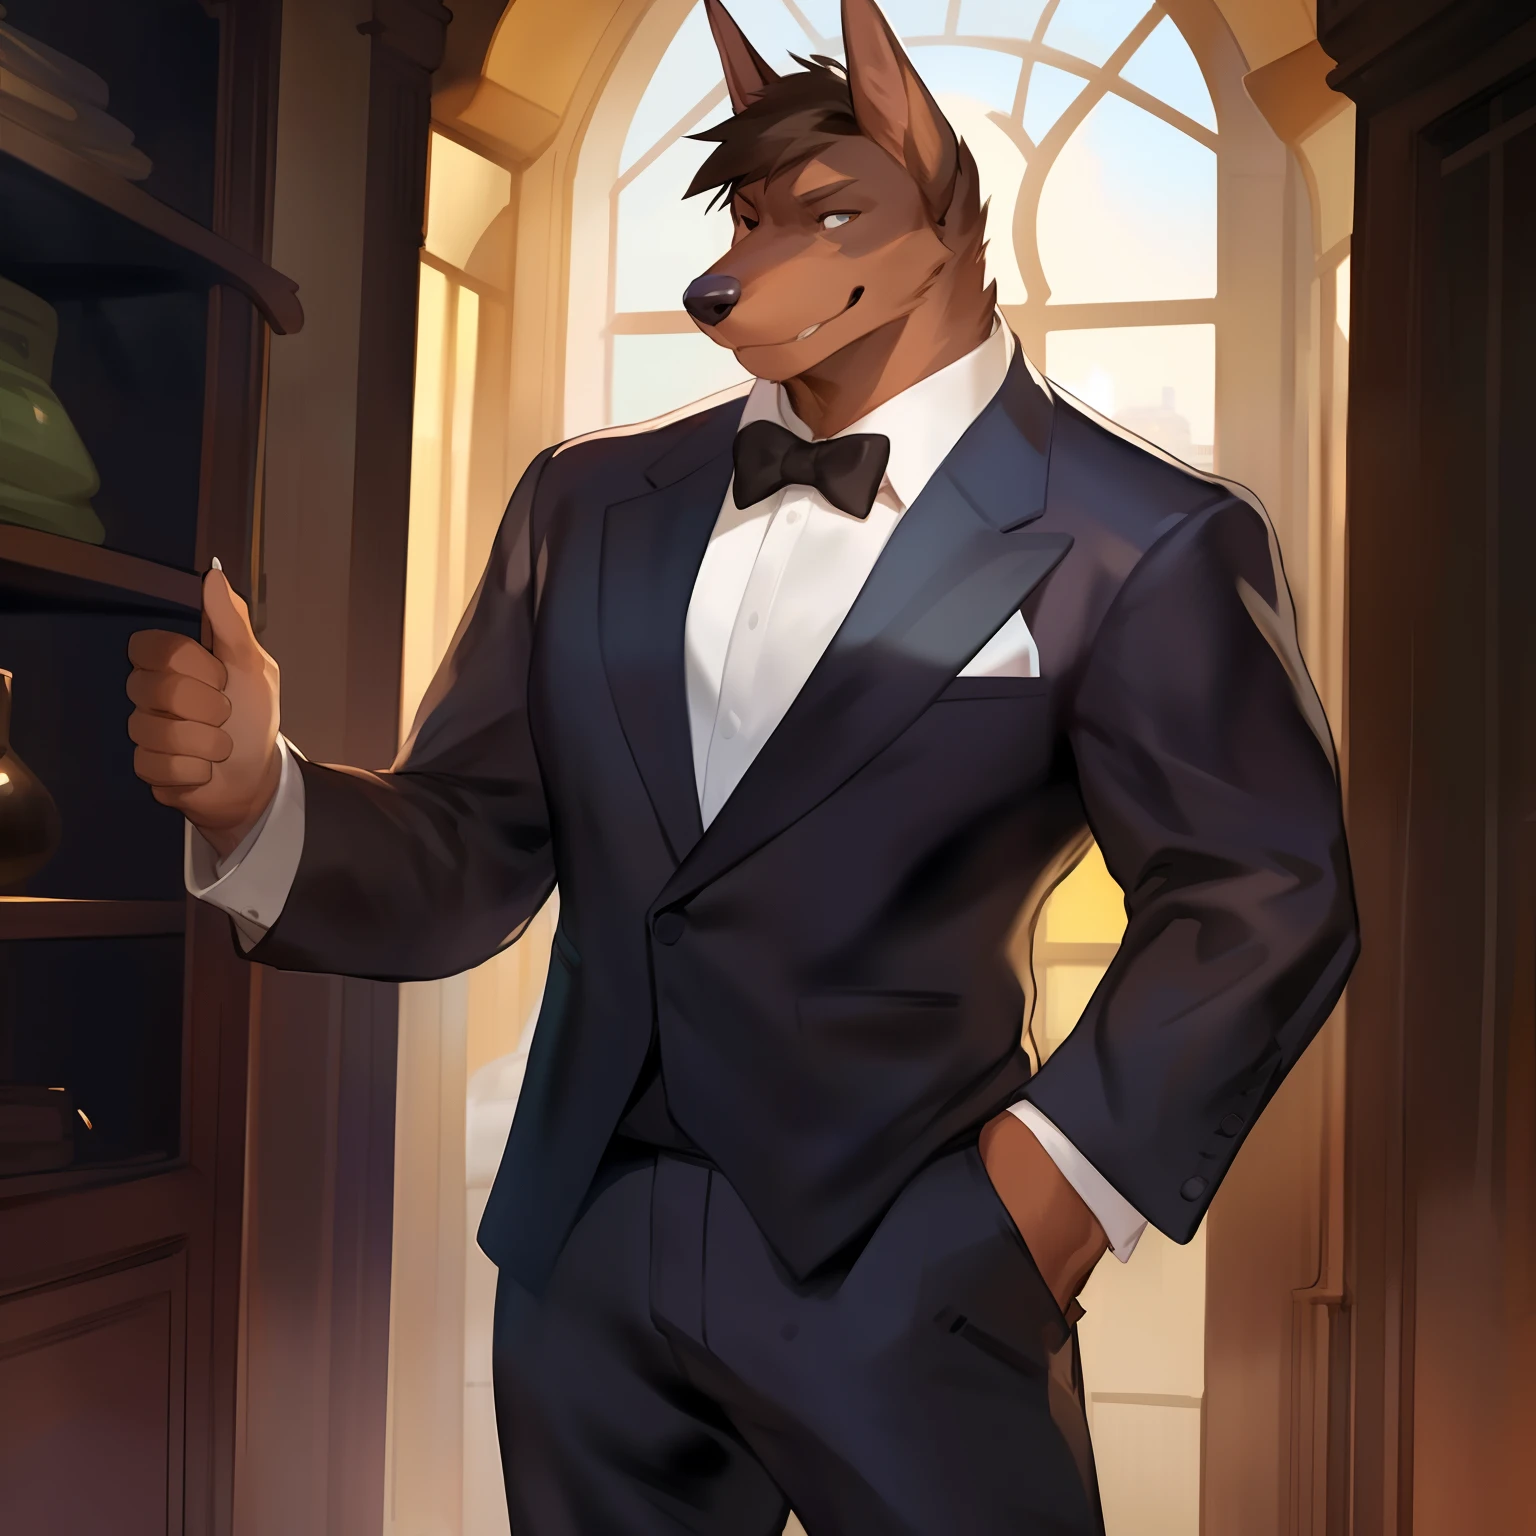 Solo, Male, canine, Doberman, (hair, snout), Muscular, by Bebebebebe, by Spikes, By Darkgem, by Mystic Fox 61, by Chunie, standing, suit